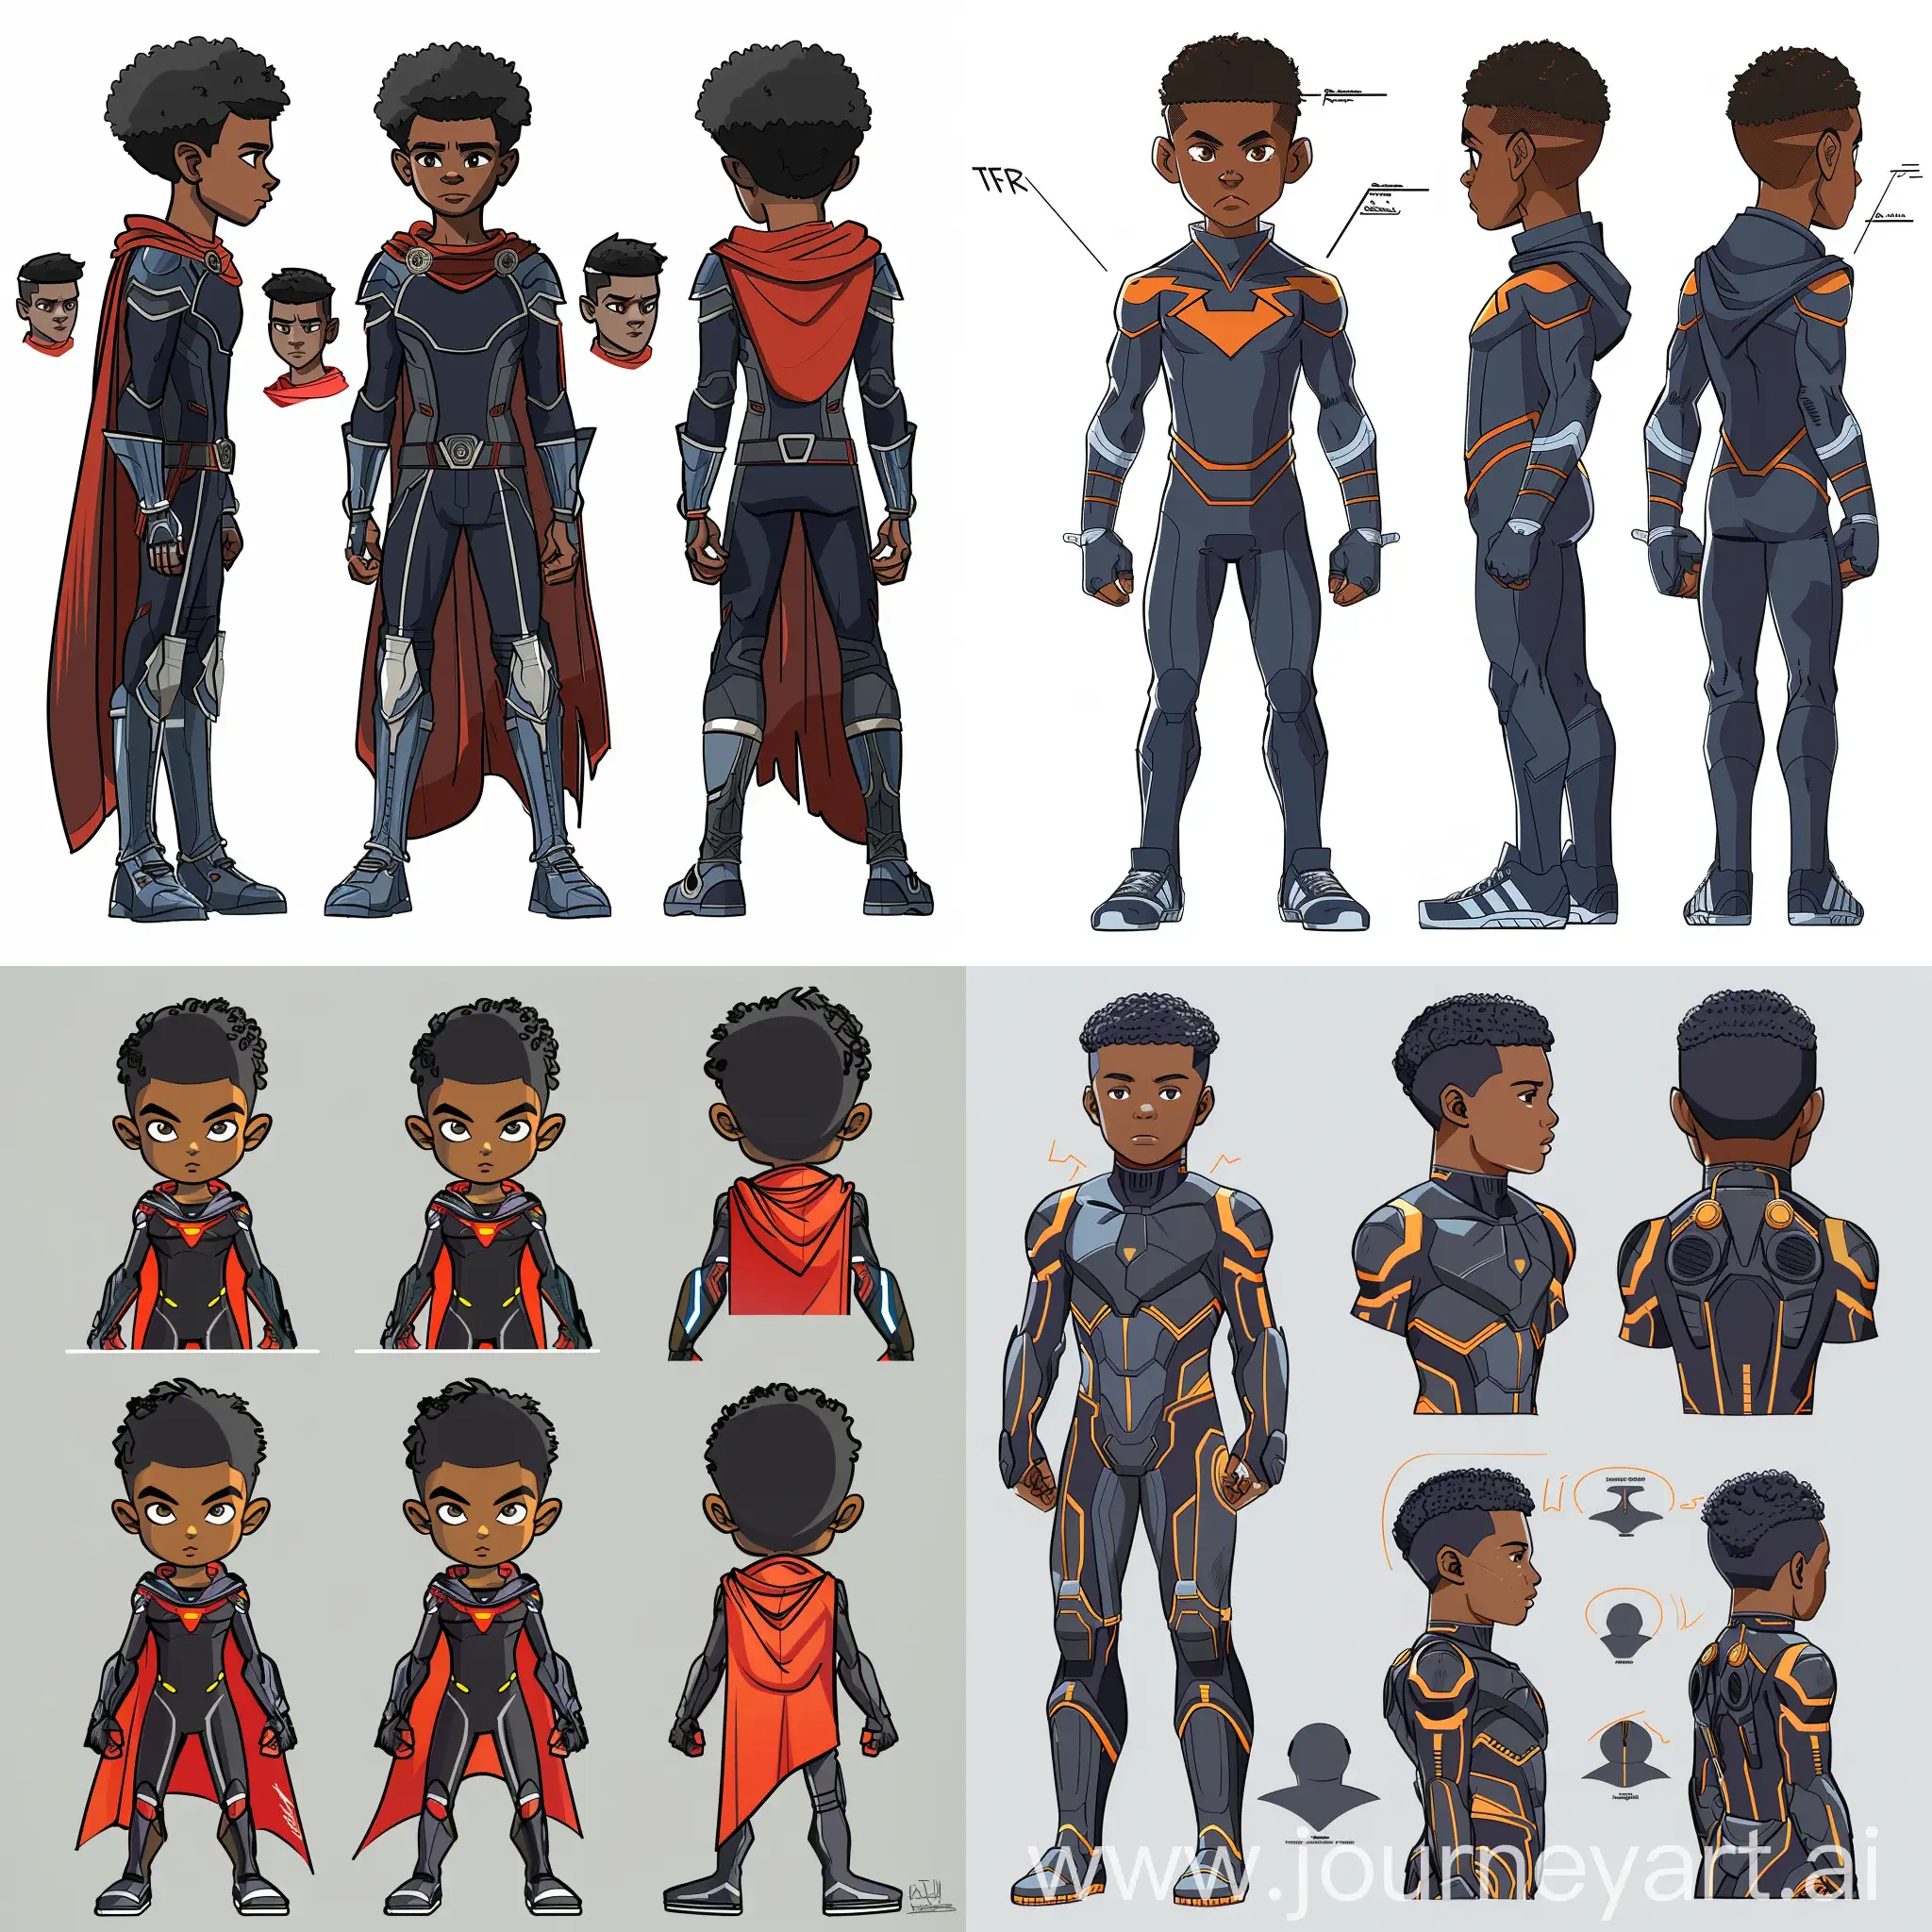 Anime Style design Character sheet of pre teen african male super powered hero